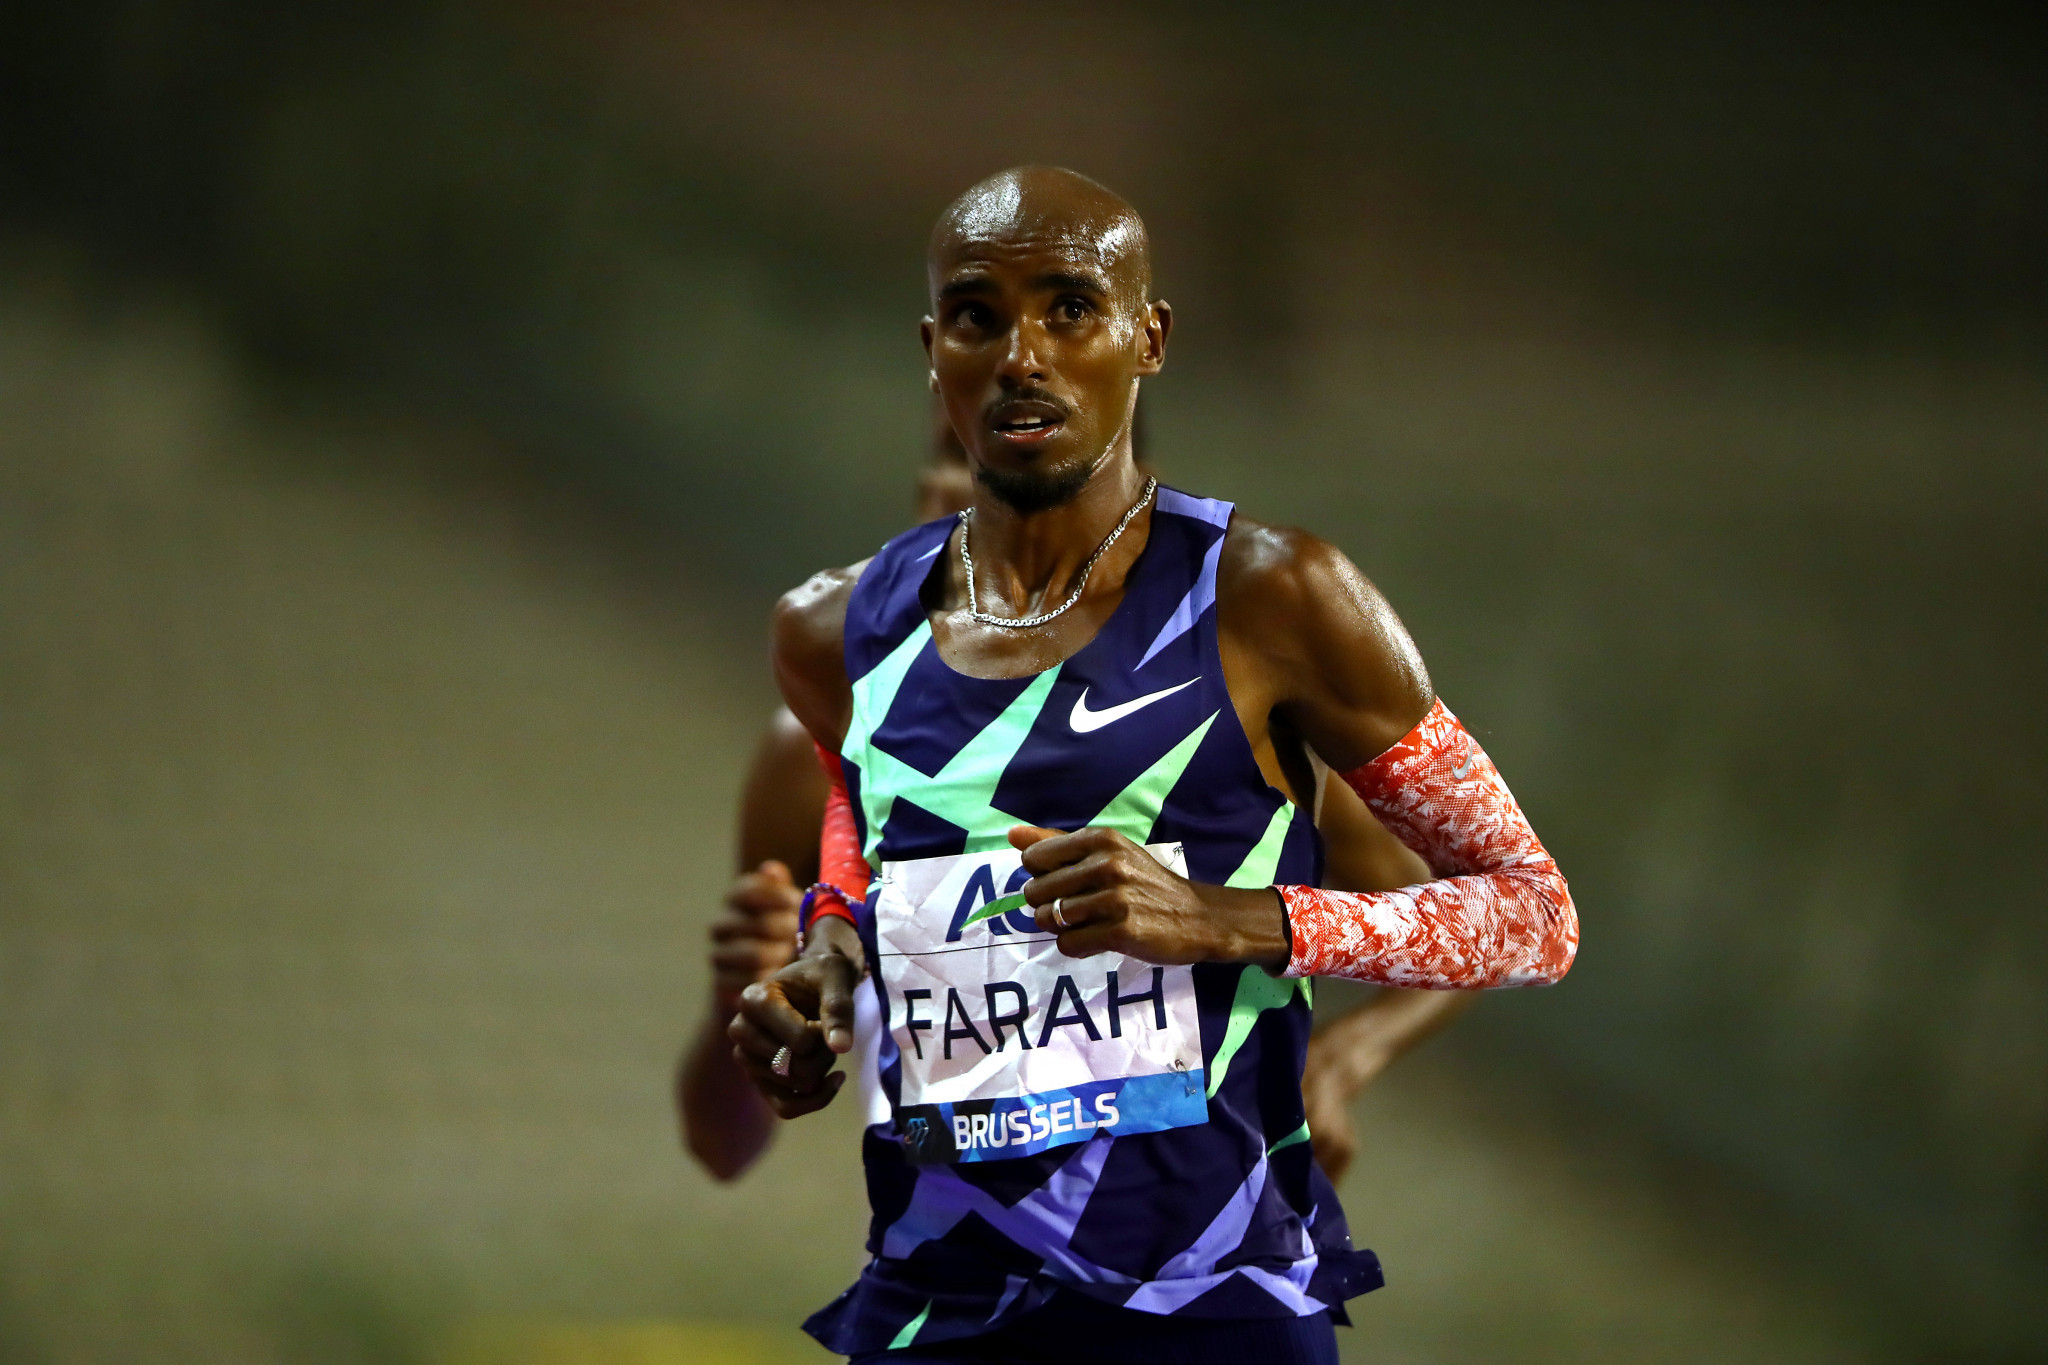 Sir Mo to skip 5,000m in pursuit of 10,000m glory at Tokyo 2020